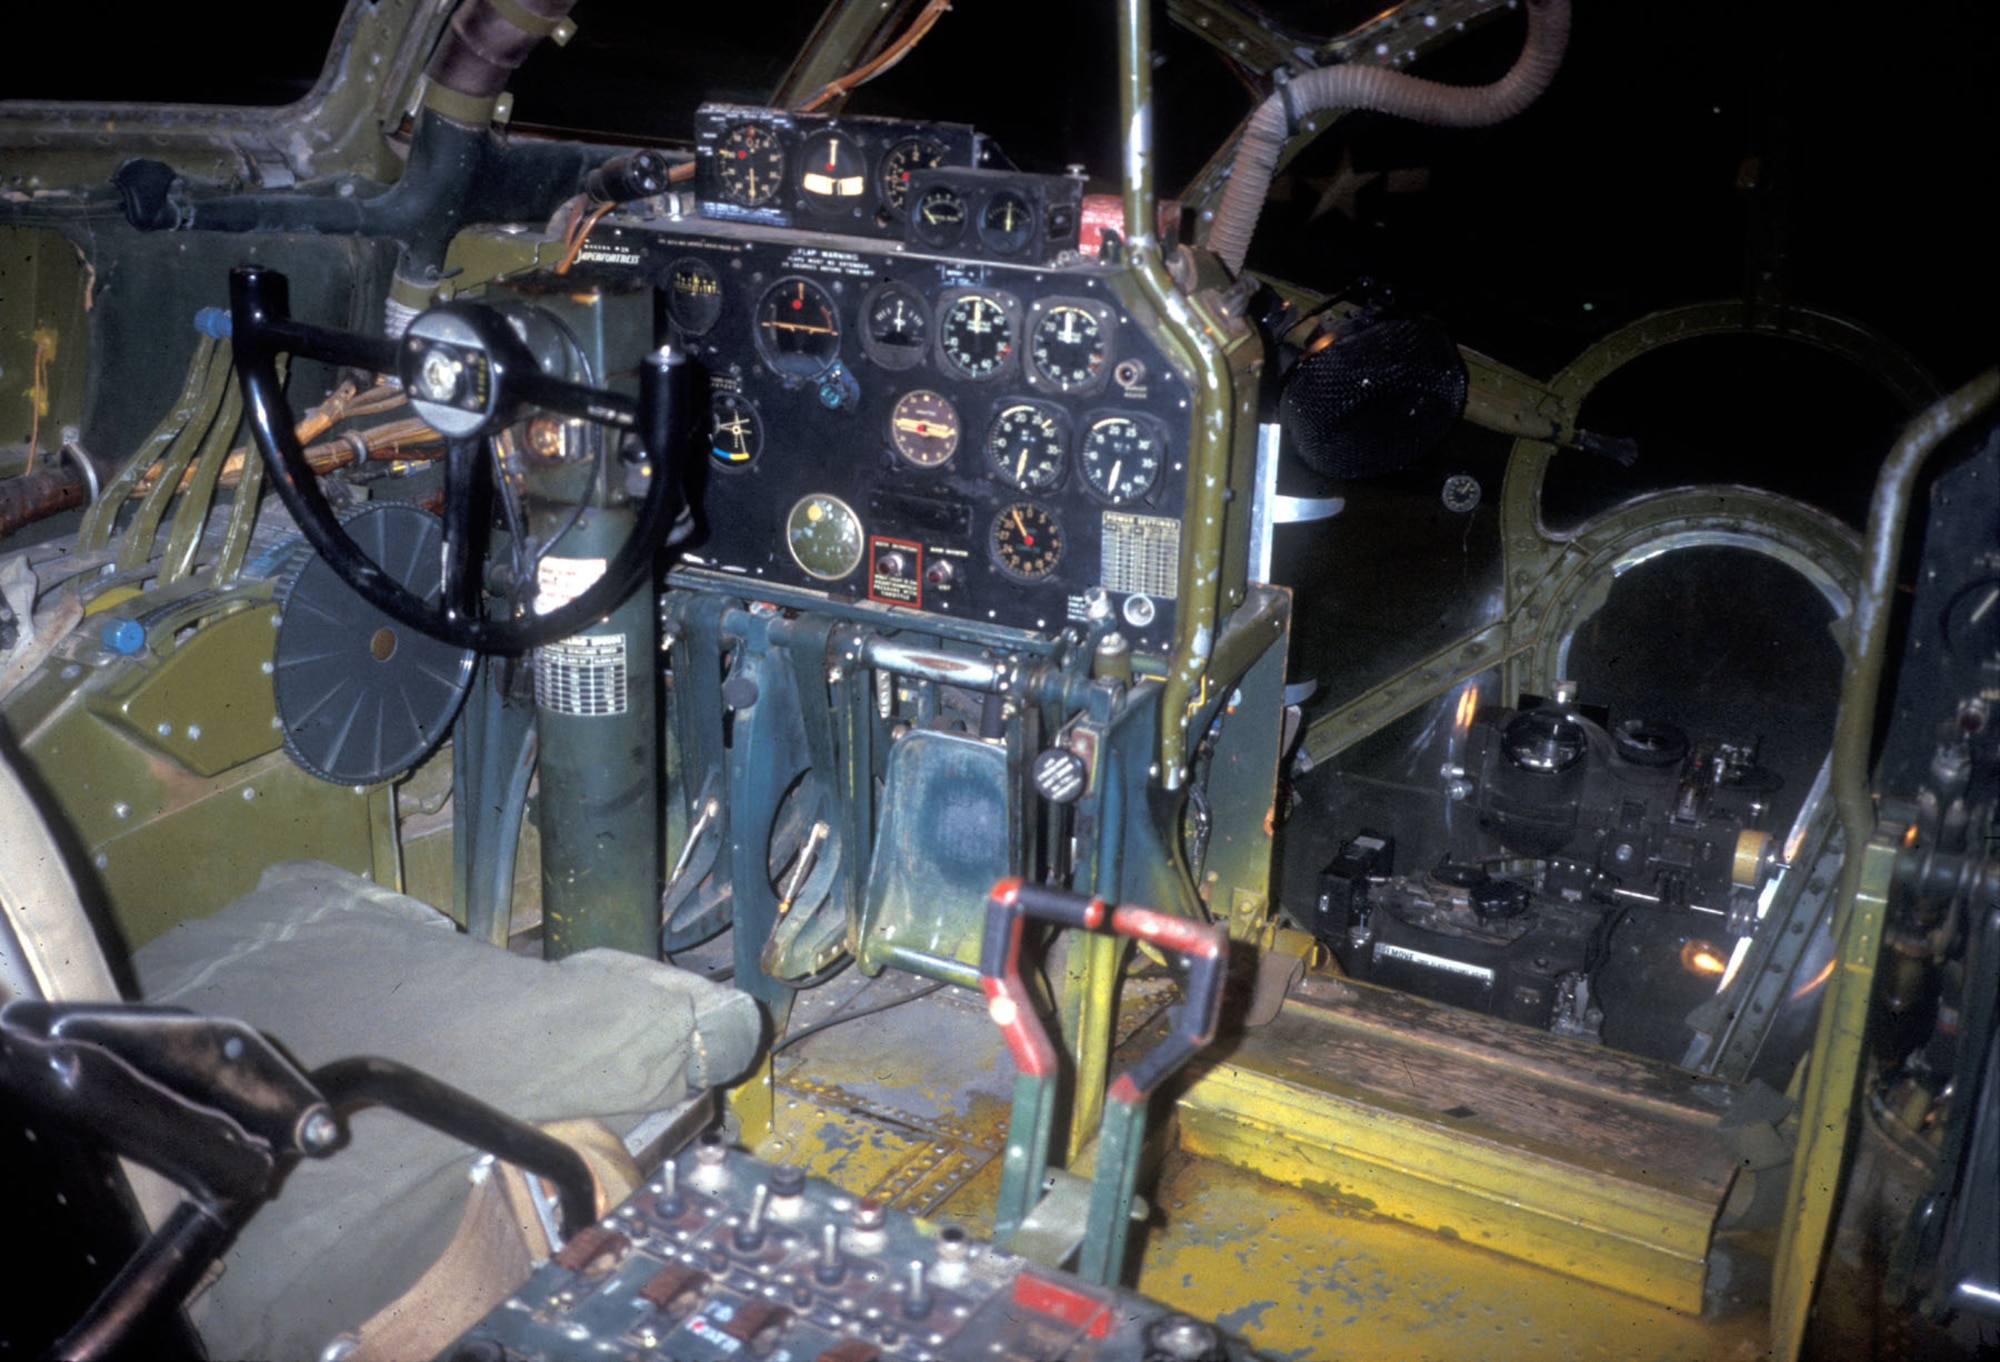 DAYTON, Ohio - Boeing B-29 "Bockscar" cockpit at the National Museum of the U.S. Air Force. (U.S. Air Force photo)